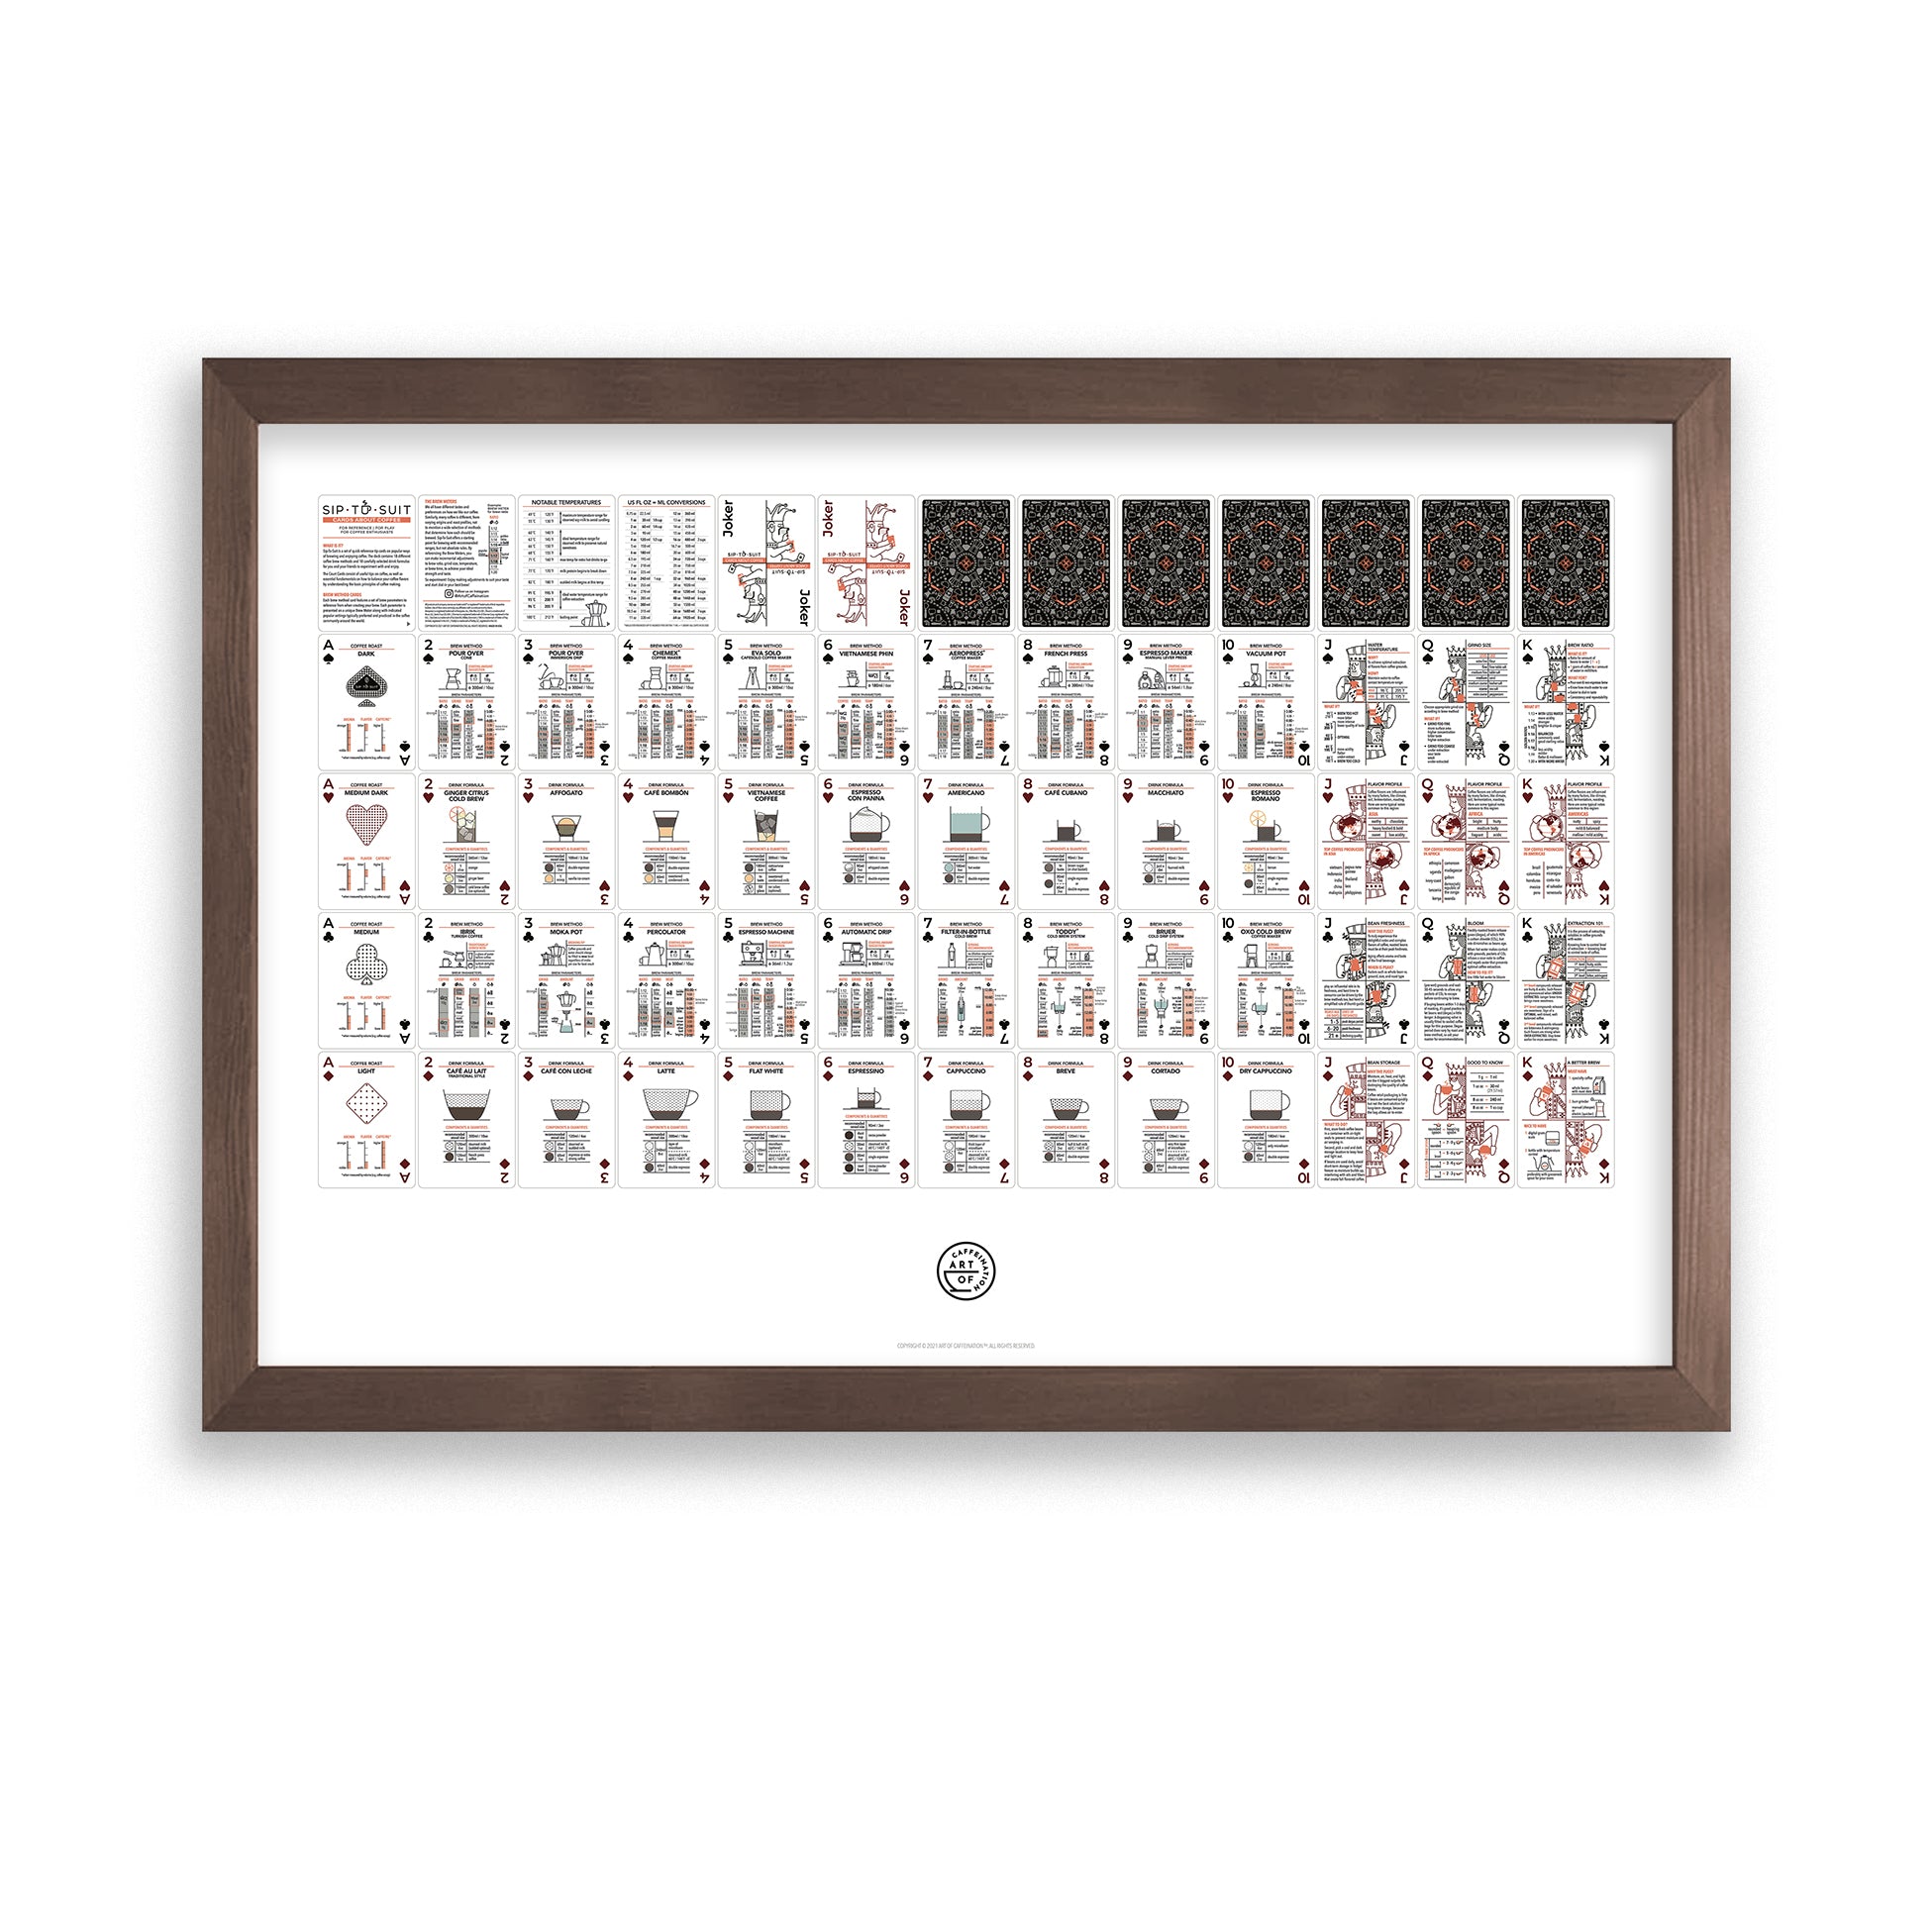 SIP-TO-SUIT Standard Edition "Construct" Poster in brown poster frame by Art of Caffeination